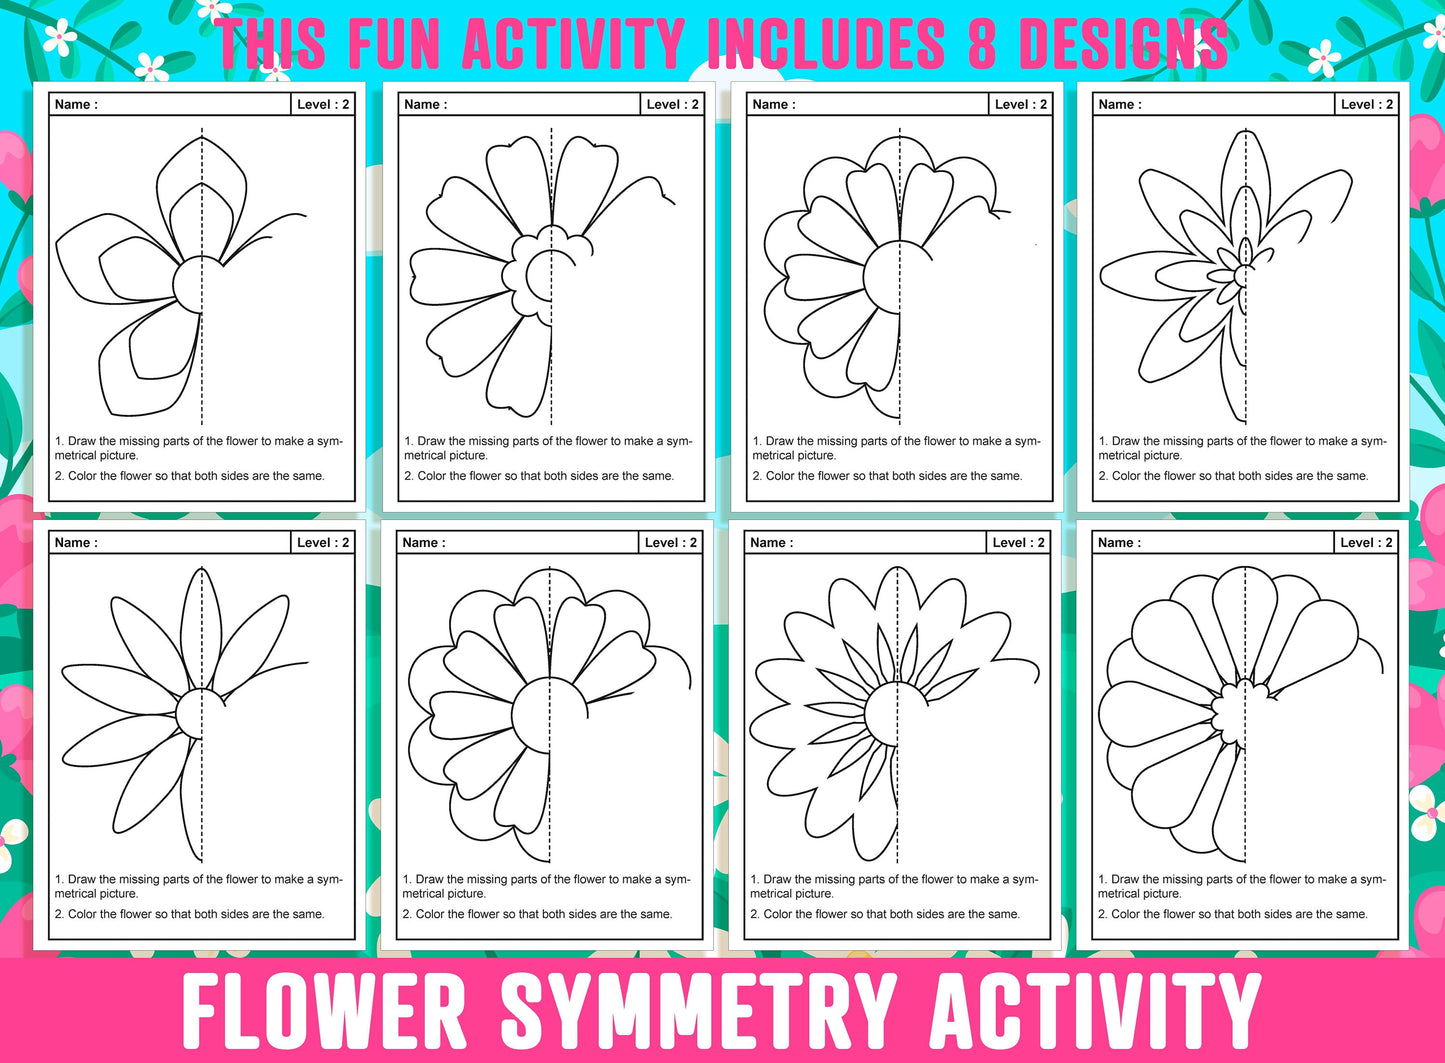 Flower Symmetry Worksheet, Flower Theme Lines of Symmetry Activity, 24 Pages, Includes 8 Designs, Each With 3 Levels of Difficulty